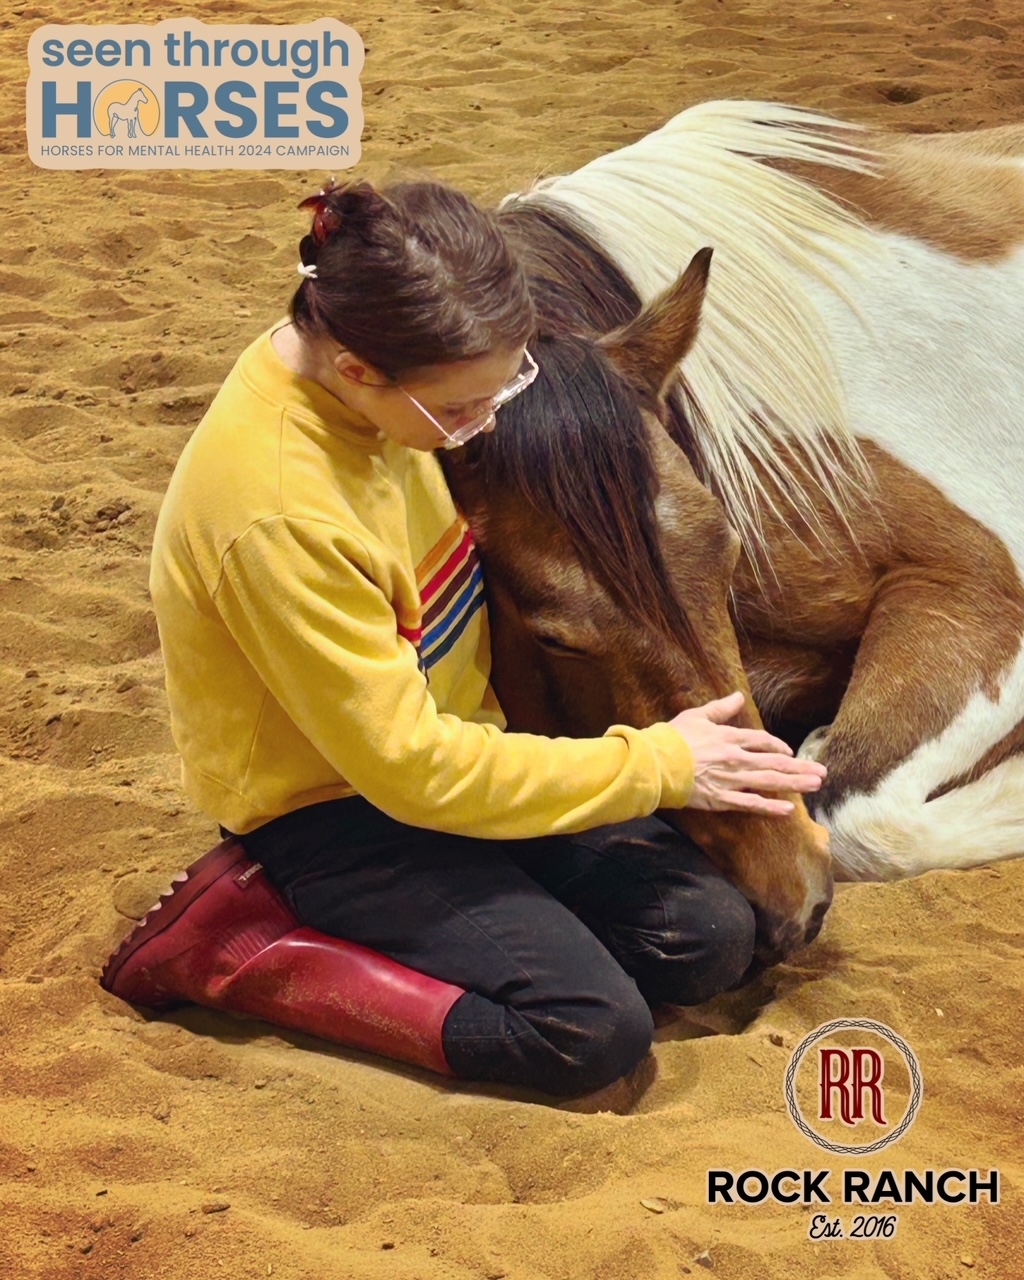 This image of a Rock Ranch client and a horse will be used on posters and promotional messaging during the month of May for the Seen Through Horses campaign. 